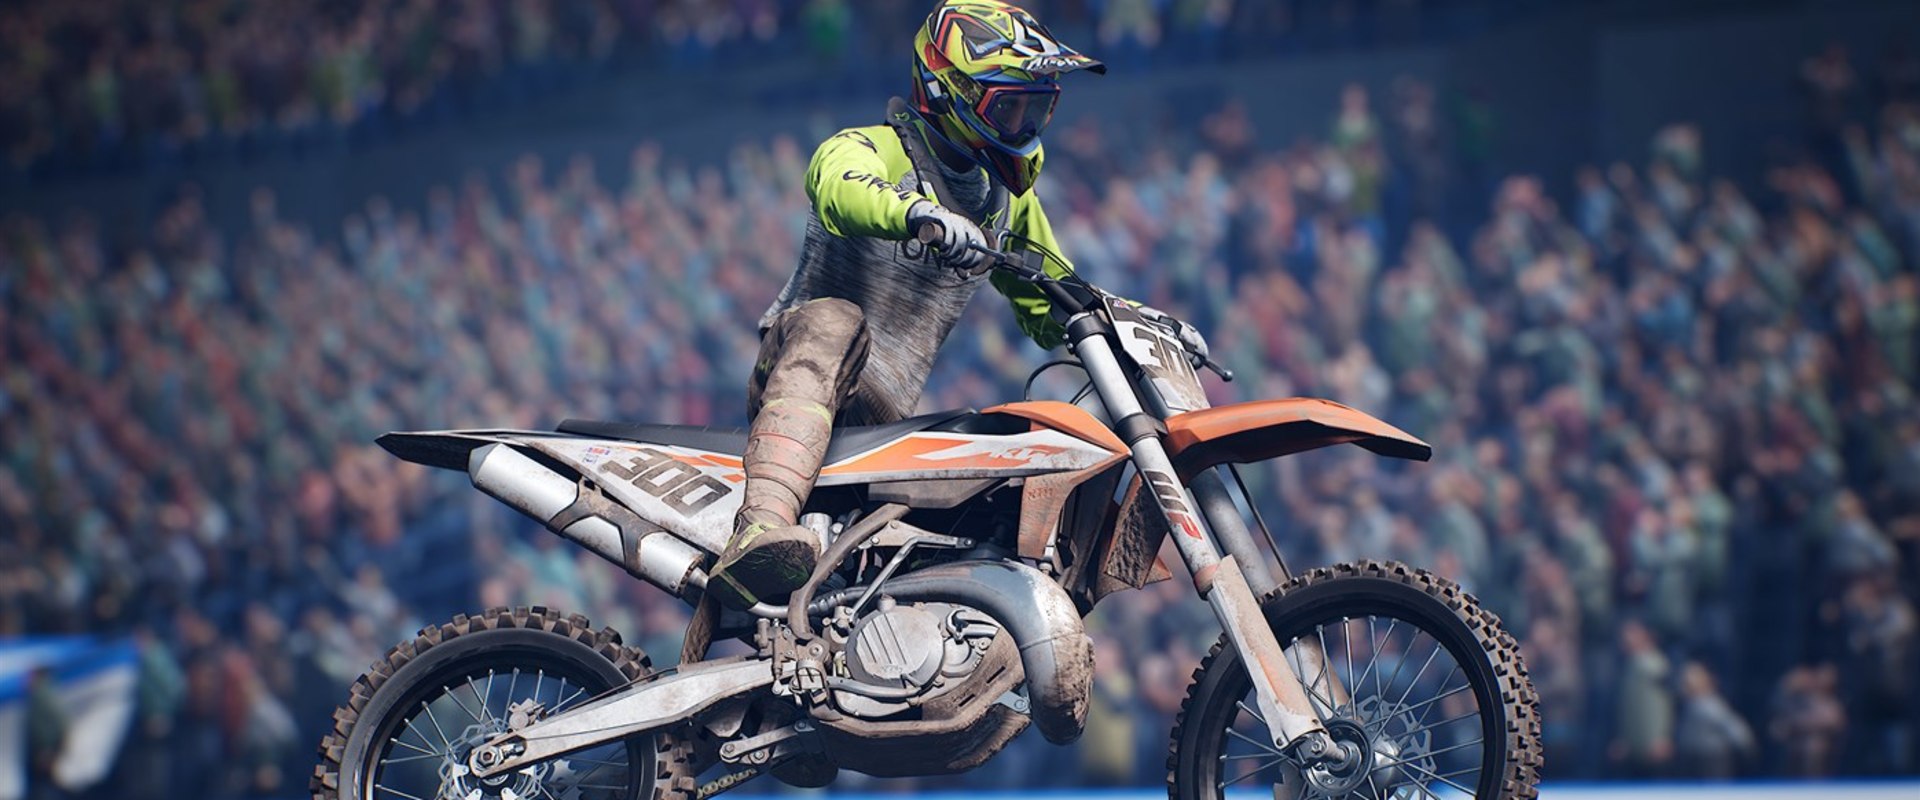 Ranking of the Best PC Motocross Games of 2021